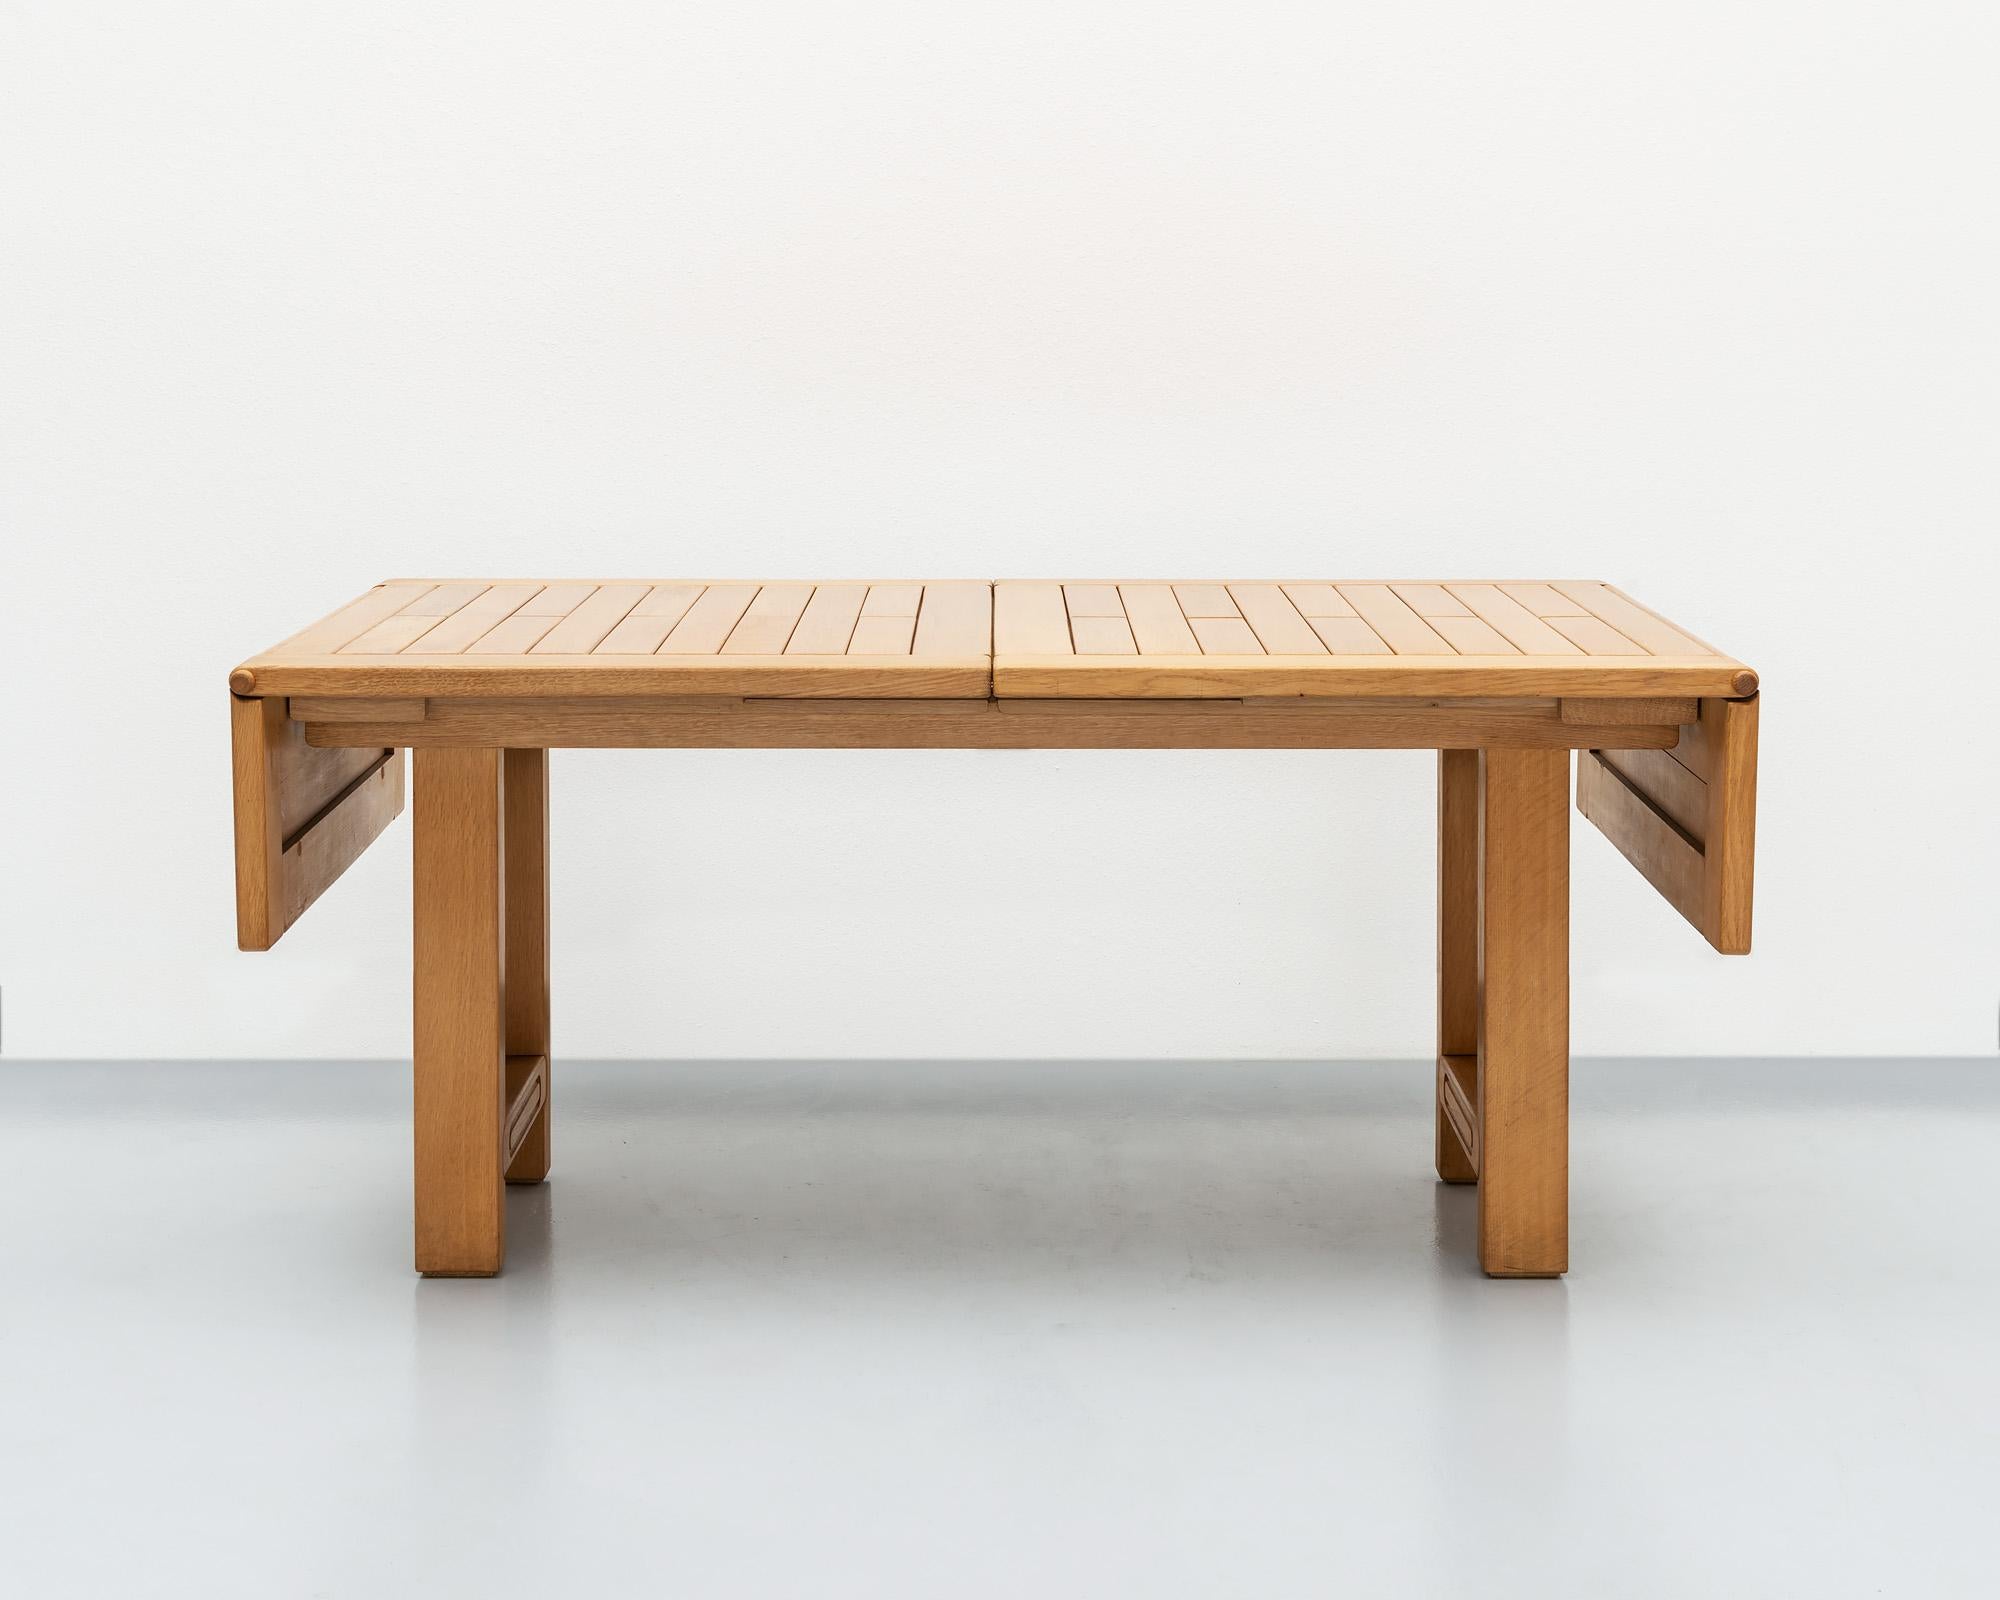 A beautiful example of the work of Guillerme et Chambron in golden oak. This table has drop leaves and comes with one extra leaf (see last two images), which extends the length to 97.5 